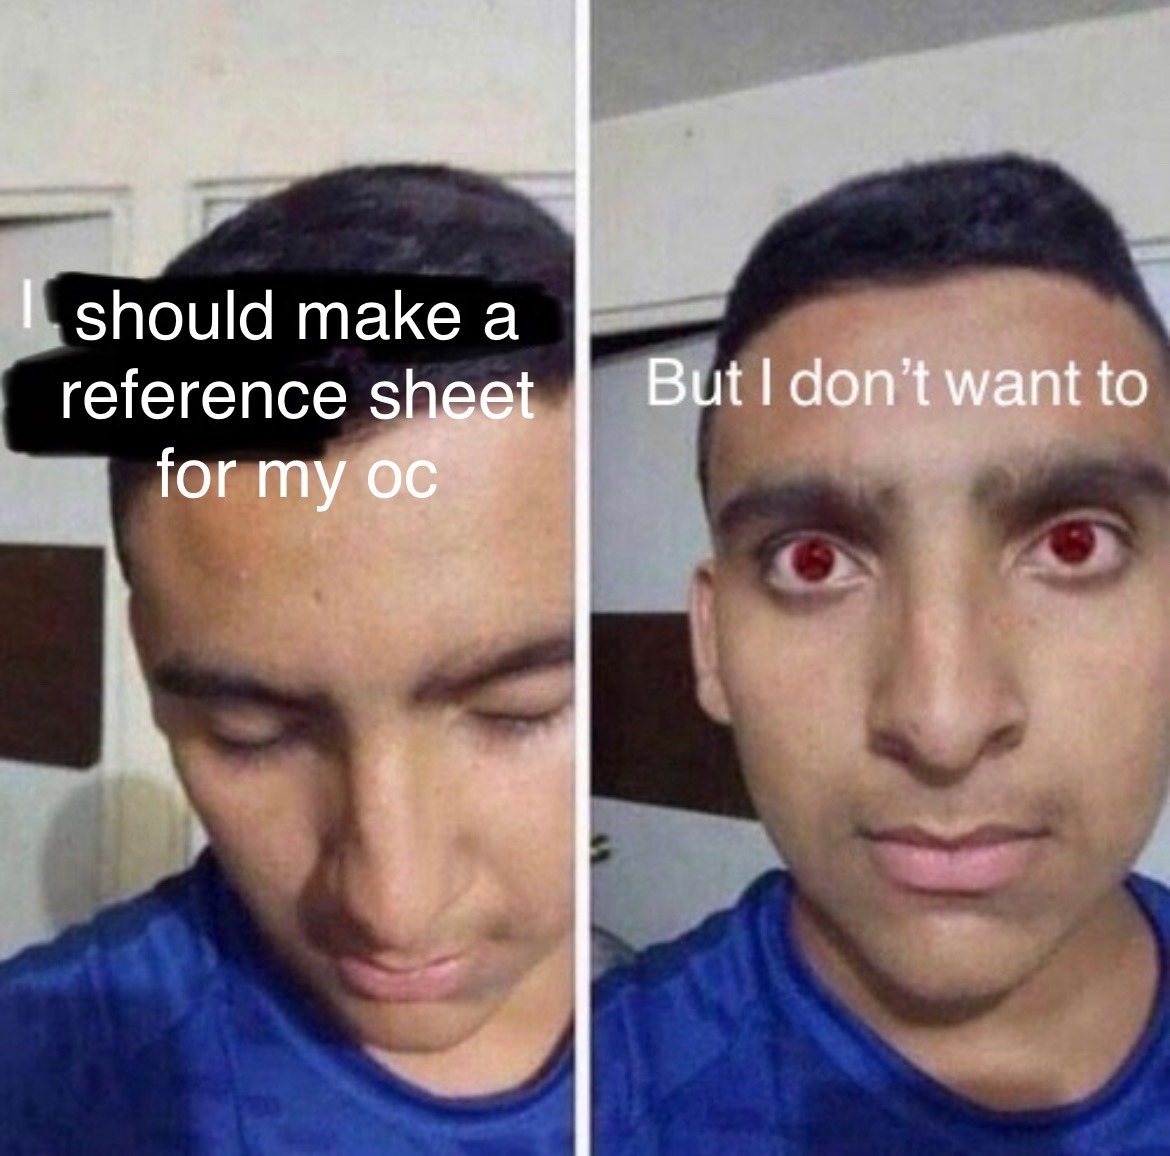 ID: An edit of the "but I don't want to" meme. The first image shows a man looking down with edited text above saying "I [should make a reference sheet for my oc]". The second panel shows the same man looking up with edited red eyes with text saying "but I don't want to". End ID